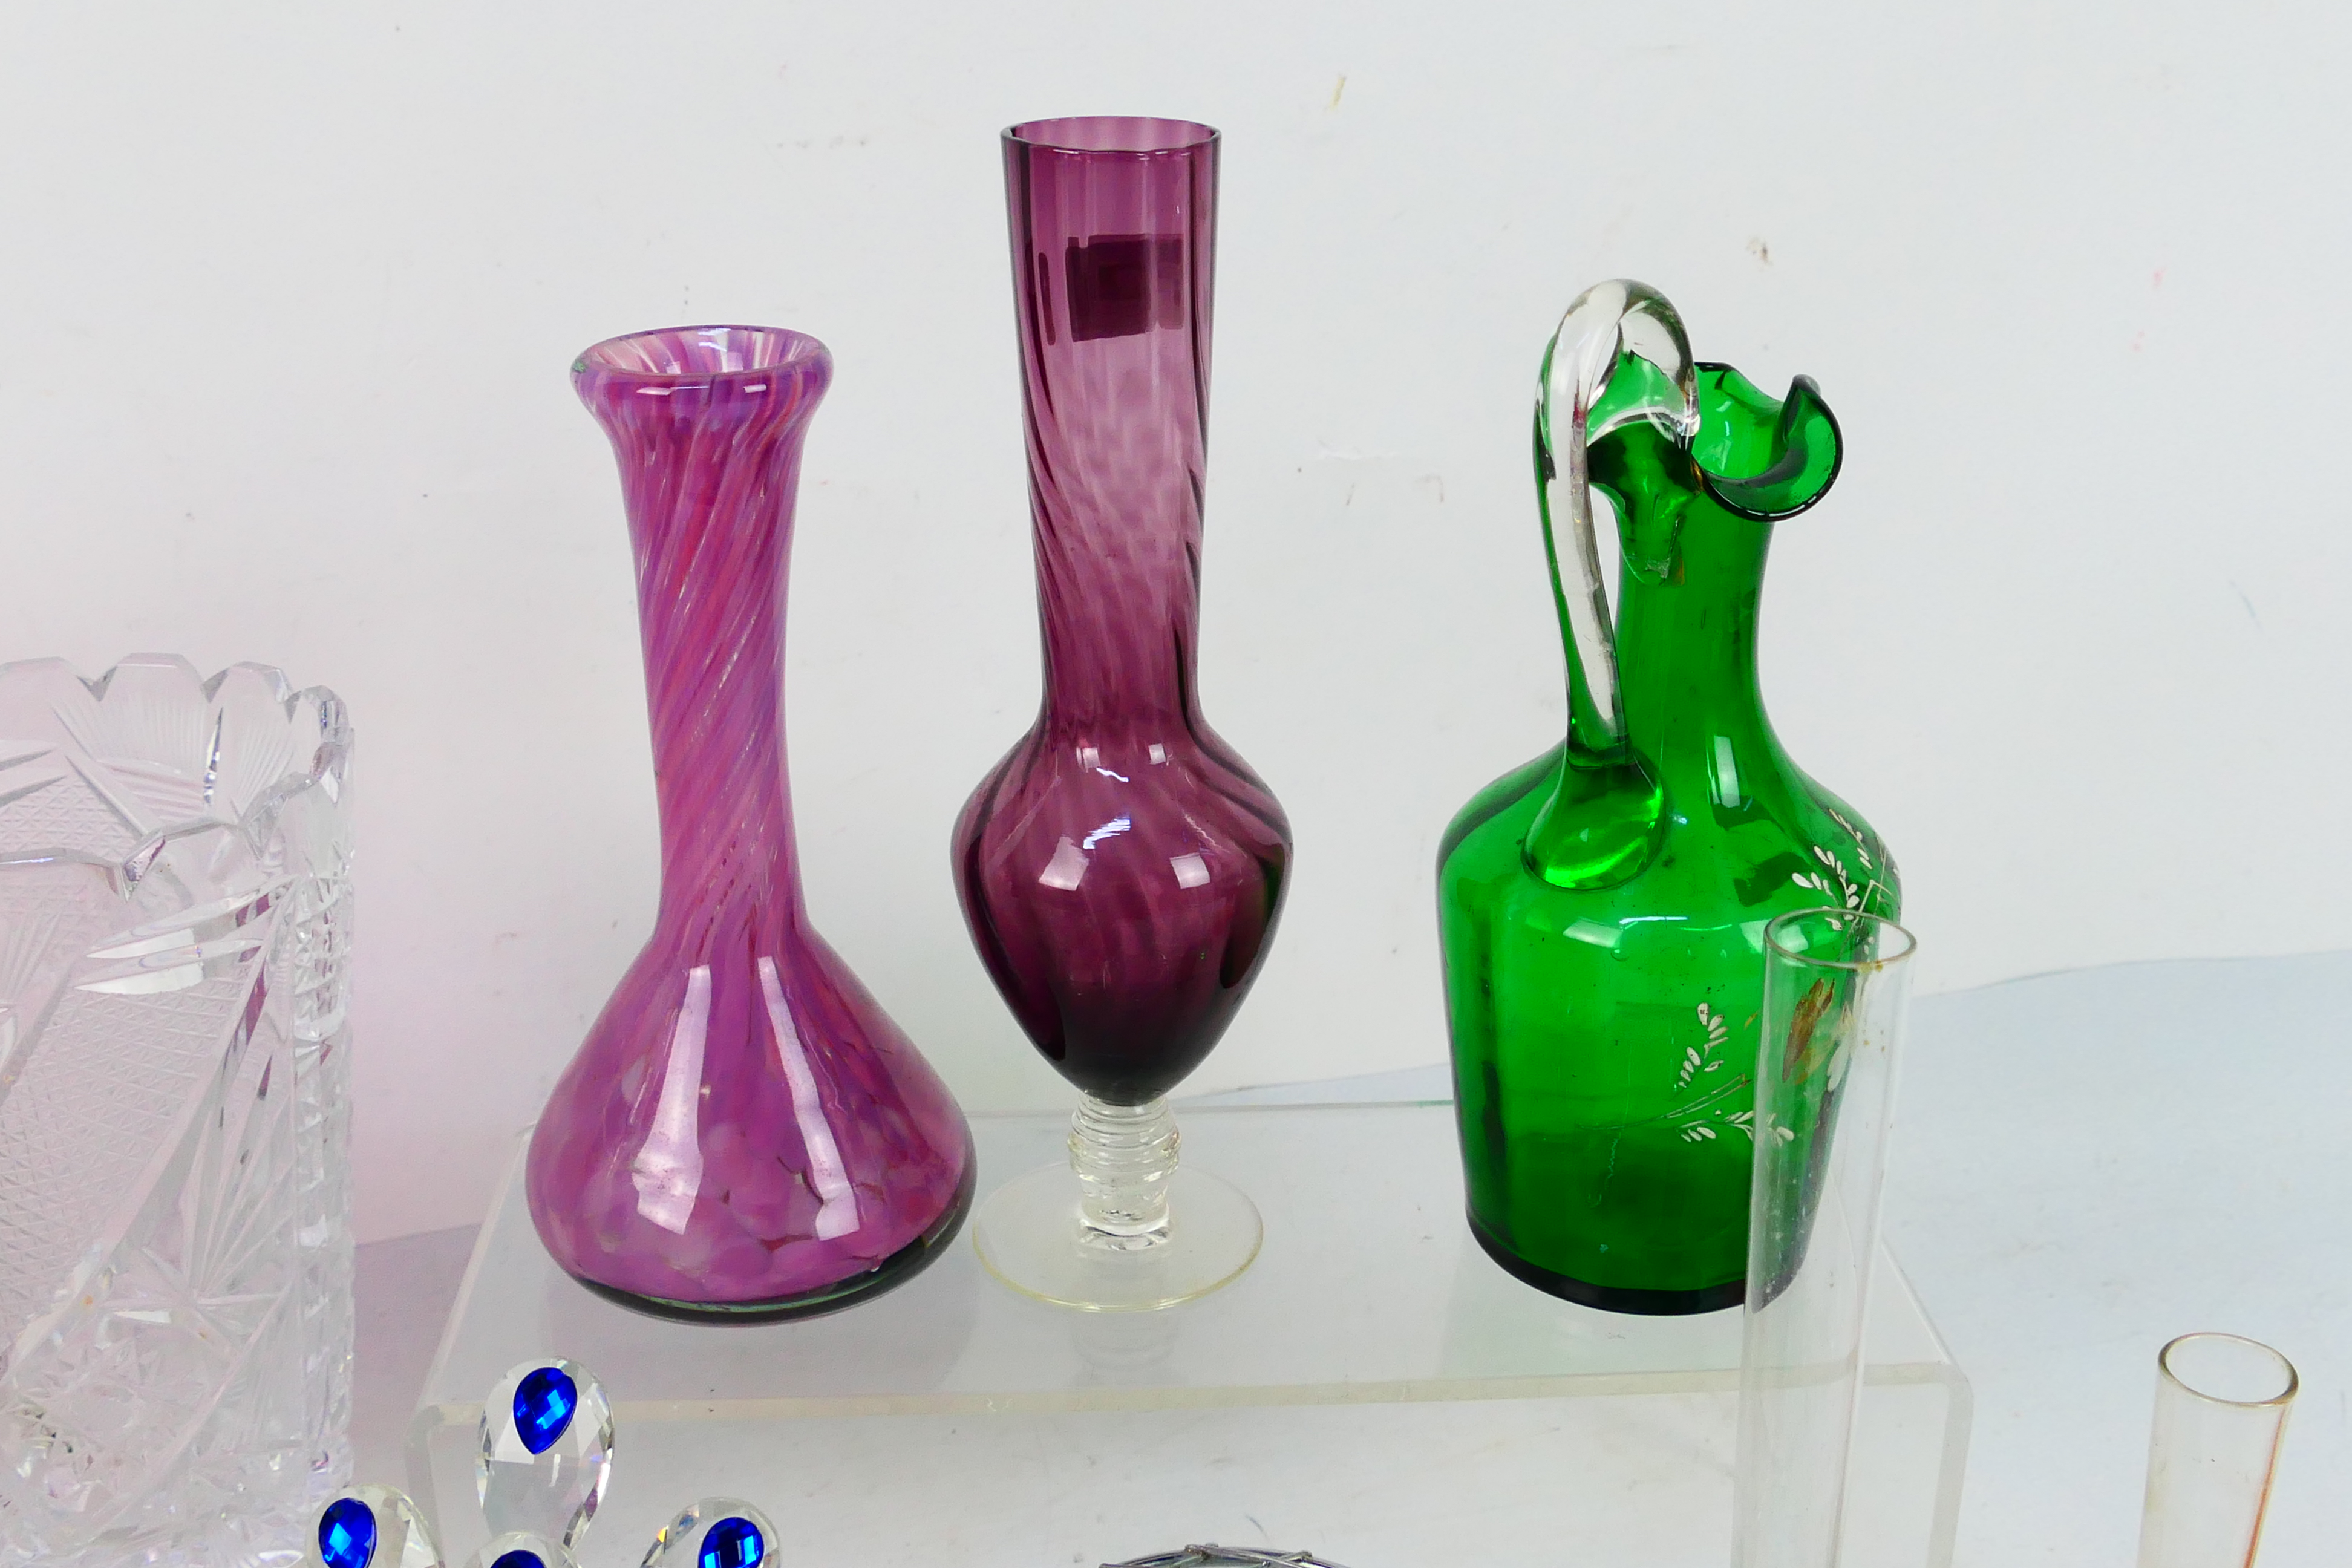 Glassware to include bowls, vases, amber glass bottle with silver clad stopper, - Image 3 of 6